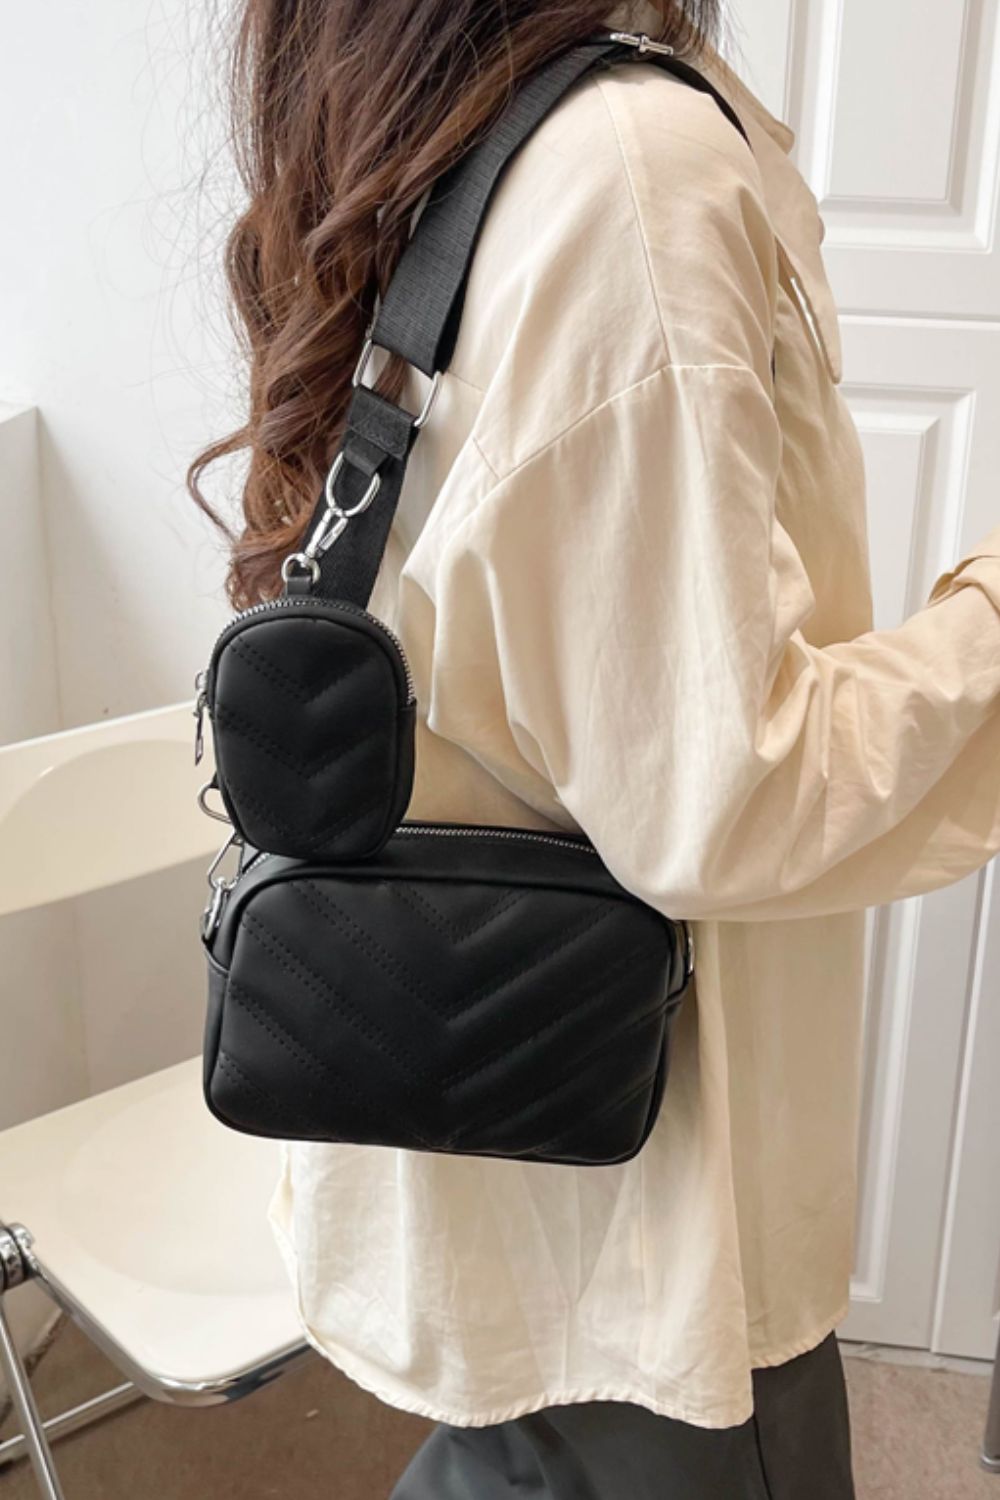 Baeful PU Leather Shoulder Bag with Small Purse